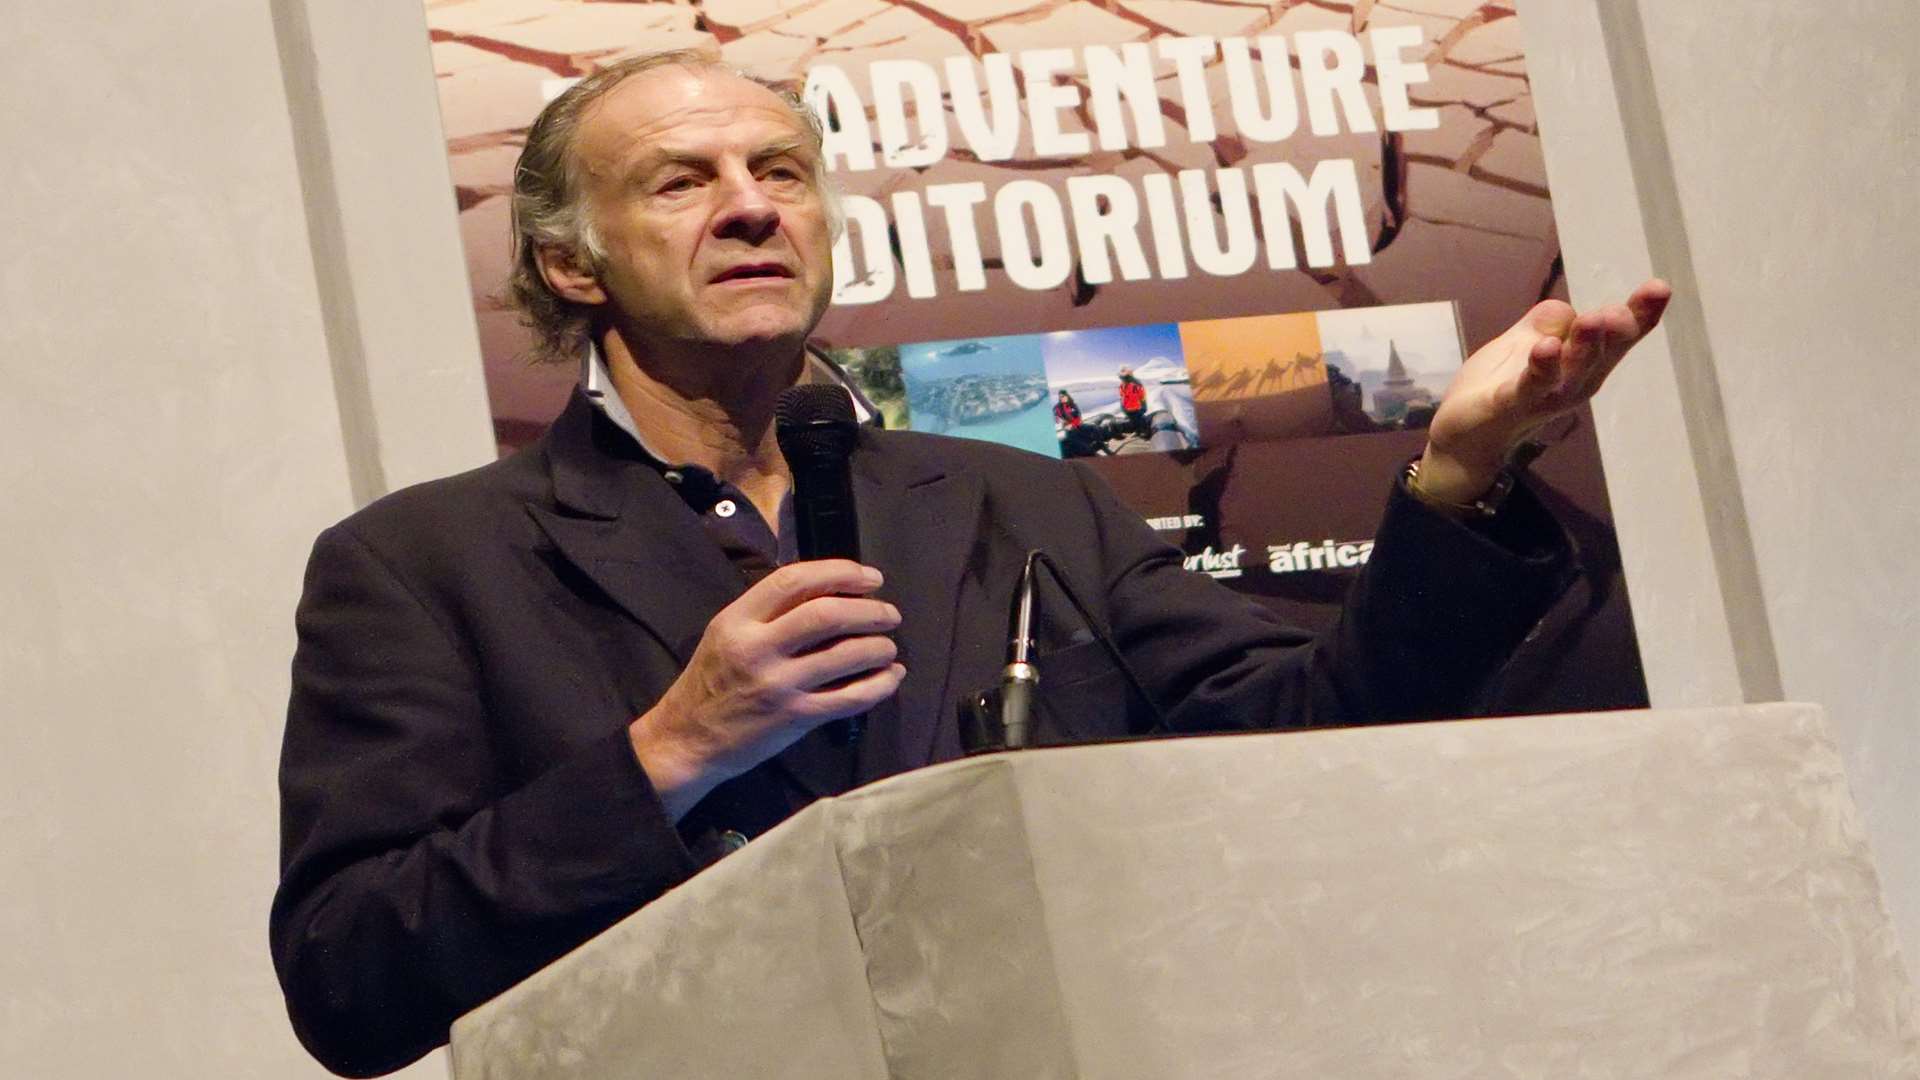 The Adventure Travel Show, which has featured Sir Ranulph Fiennes as a speaker, is held at Olympia in London